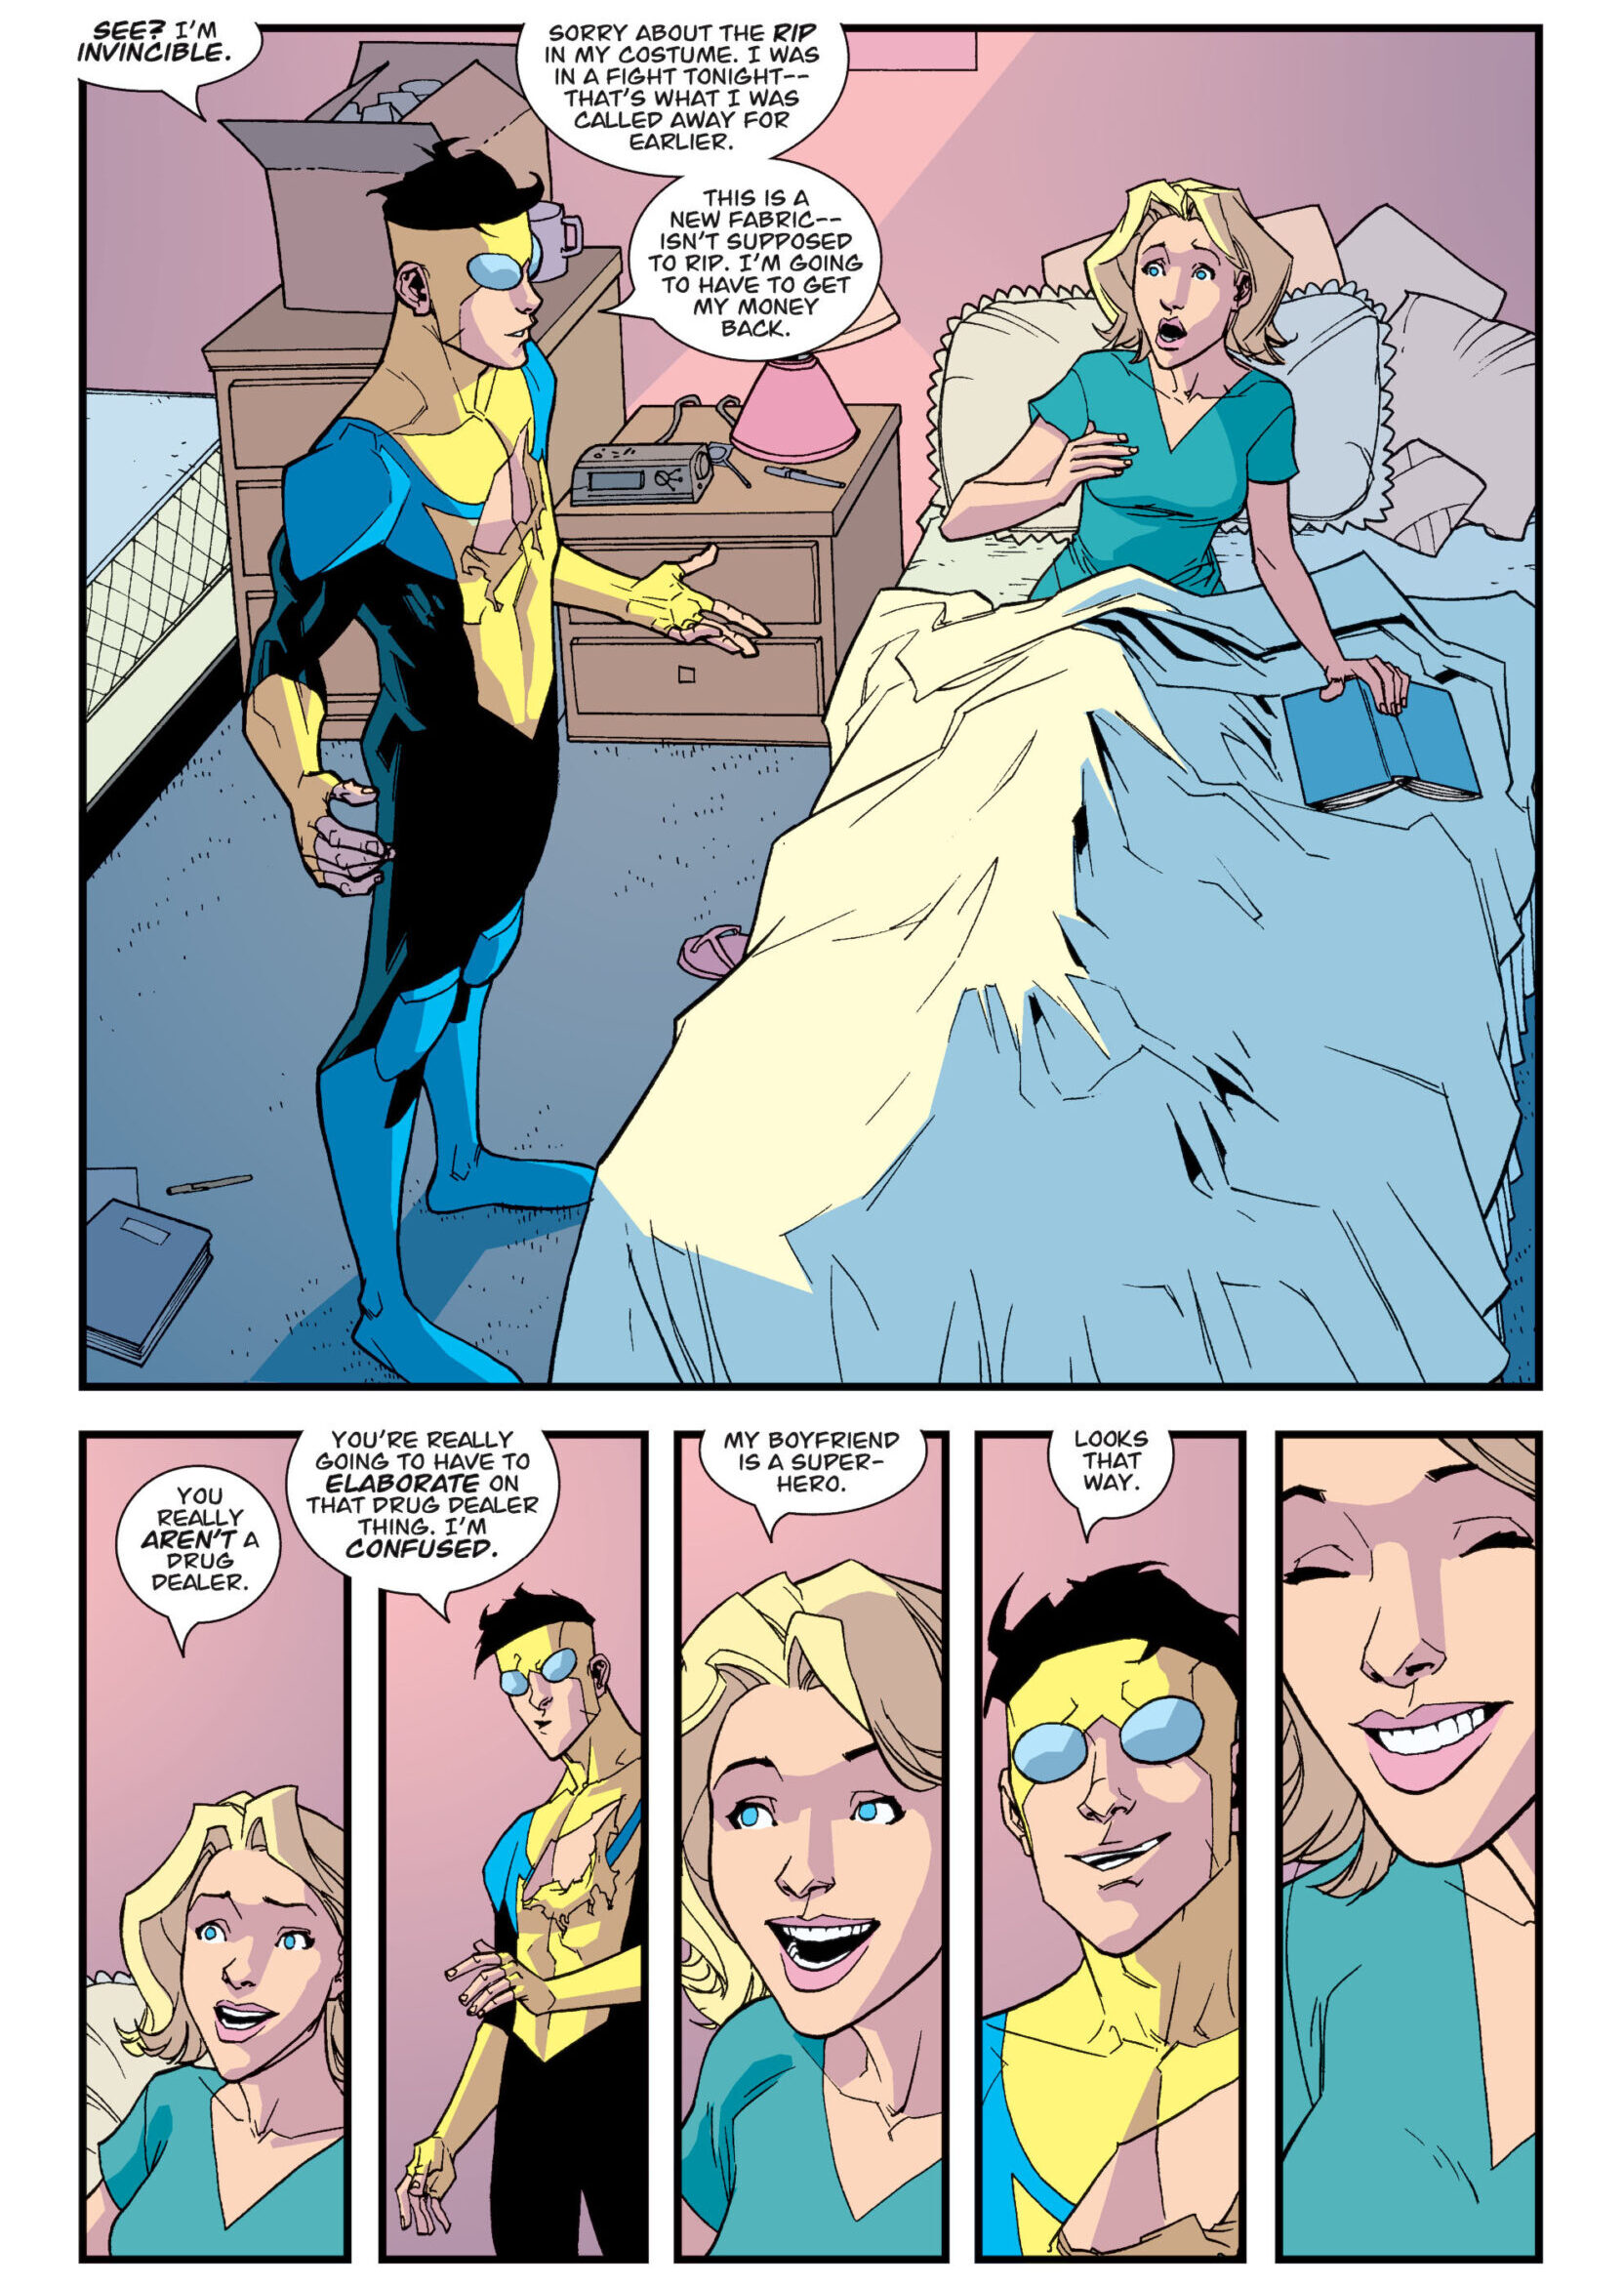 Invincible reveals his secret identity to Amber in Invincible Vol. 1 #22 "Man--That Was a Great Flick" (2005), Image Comics. Words by RObert Kirkman, art by Ryan Ottley, Bill Crabtree, and Rus Wooton.